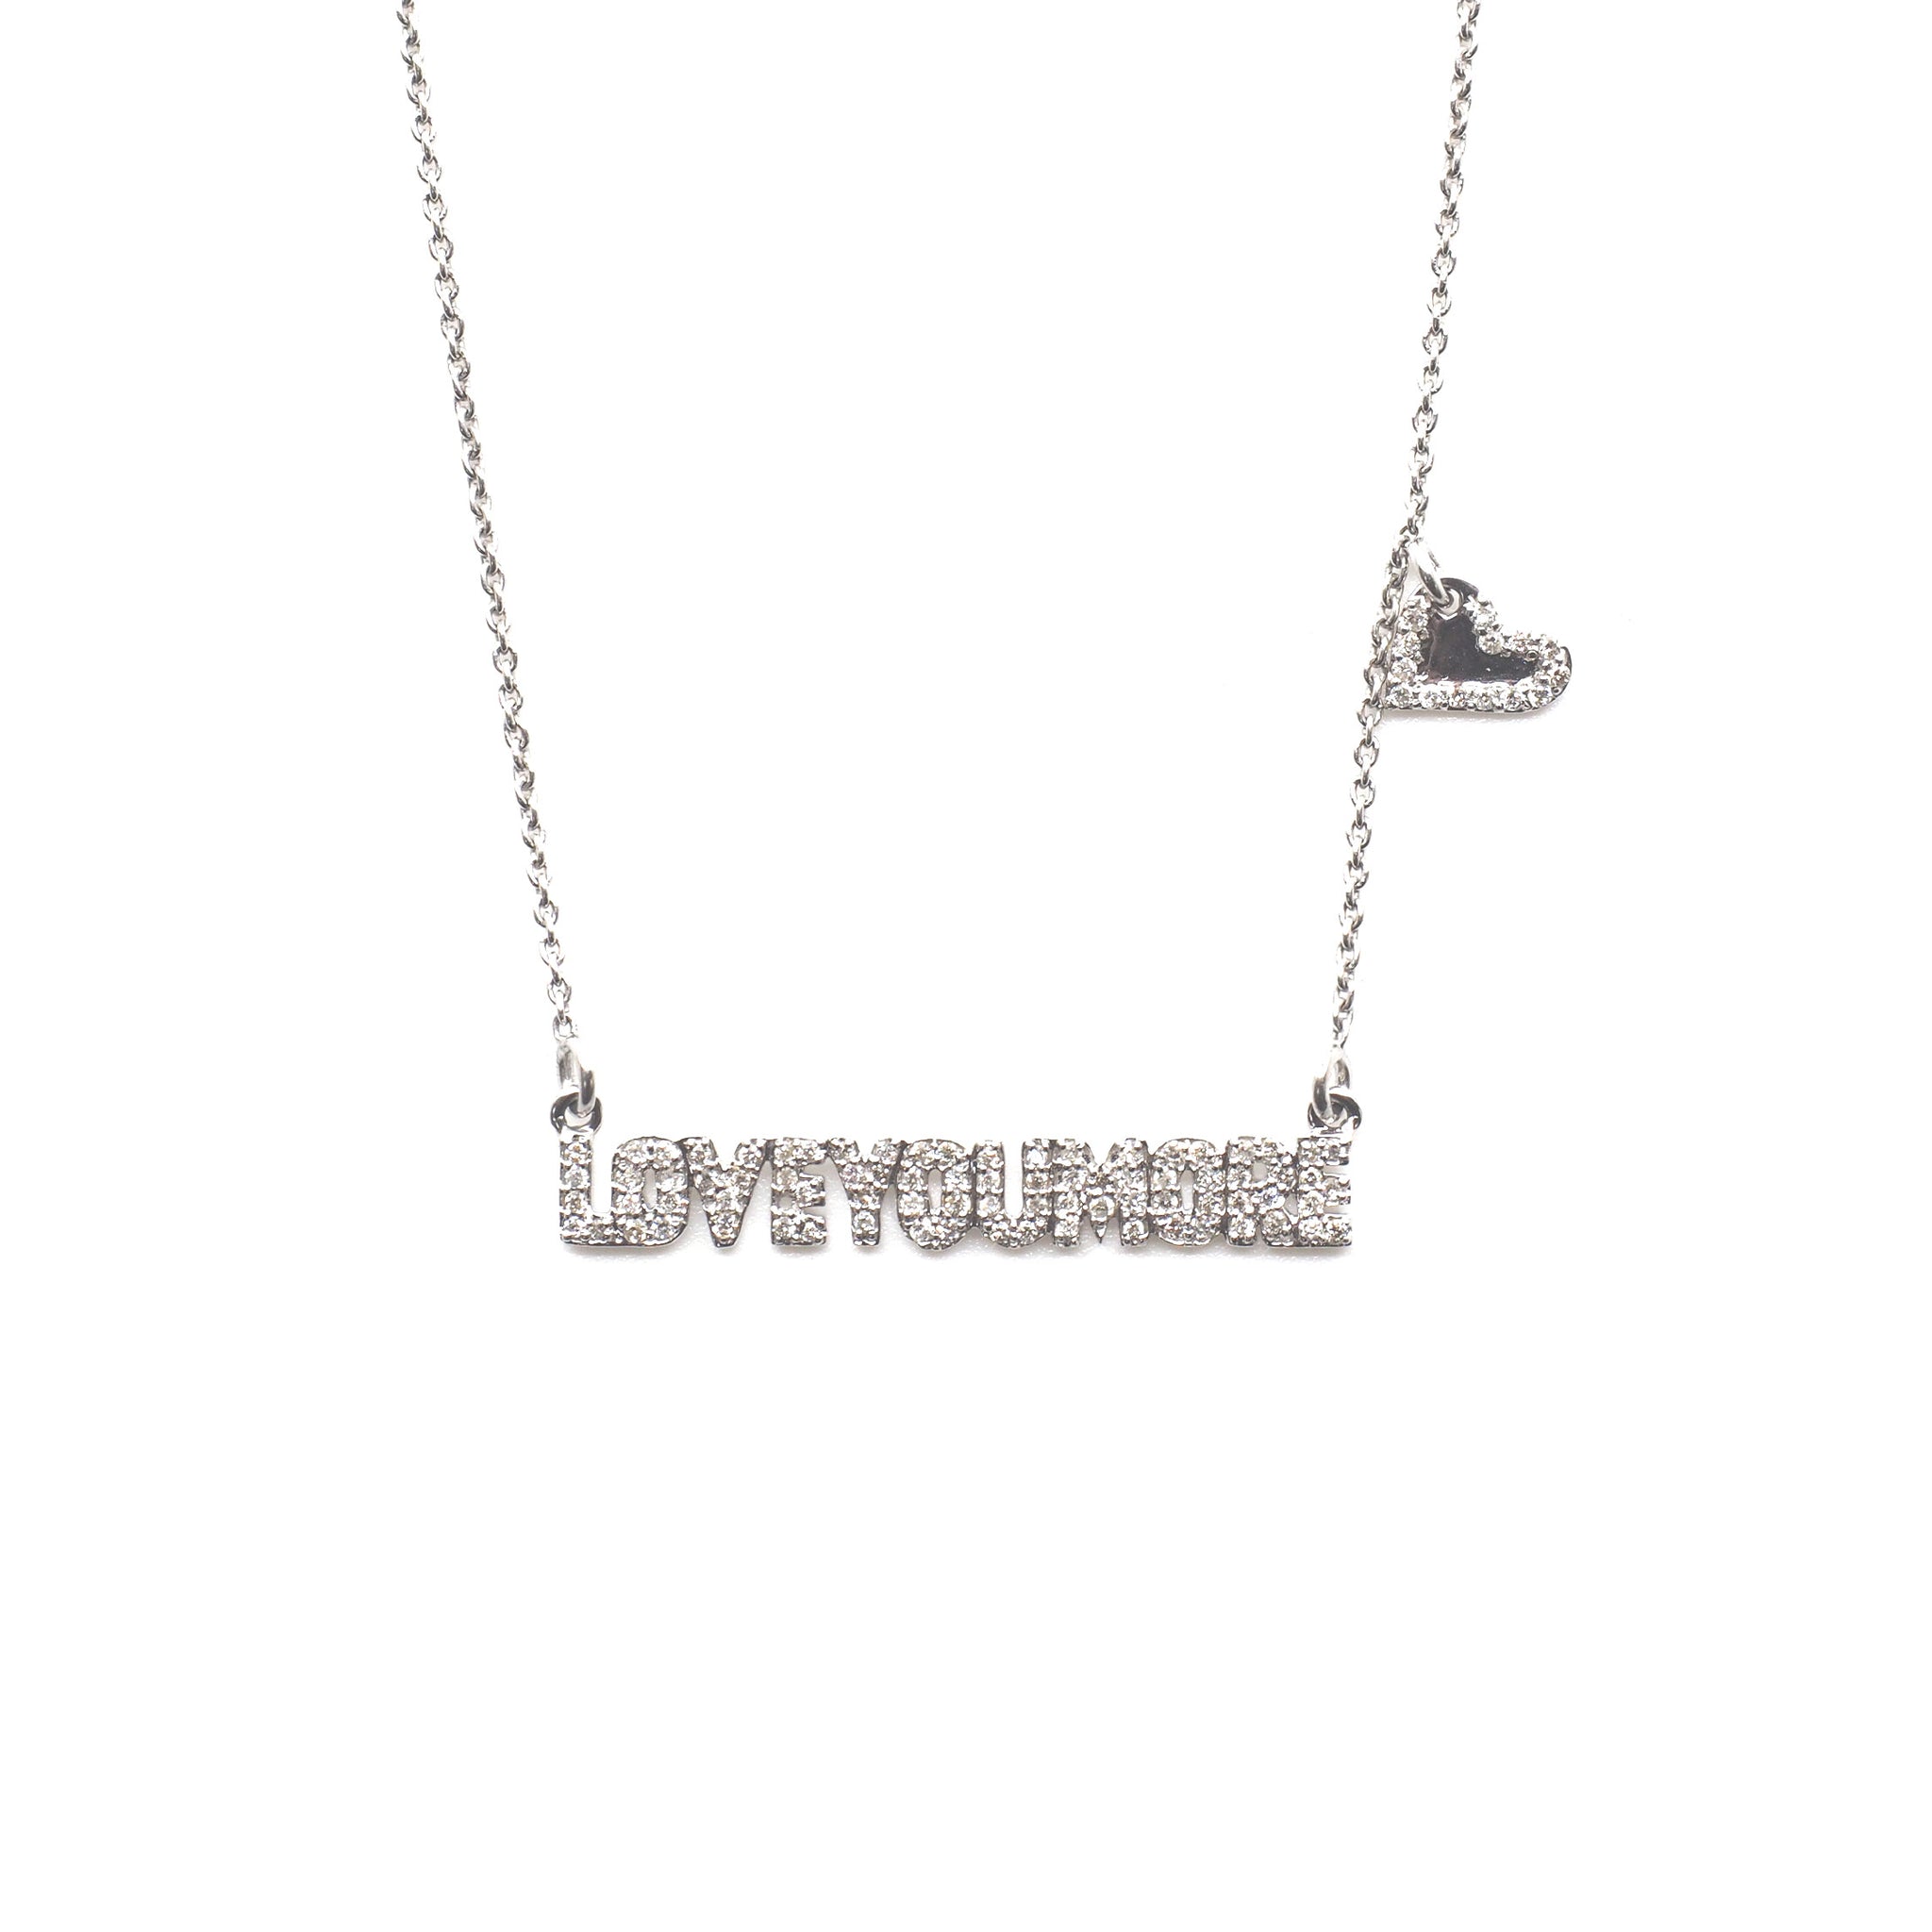 The Love You More Bar Necklace in White Diamond & 14K White Gold